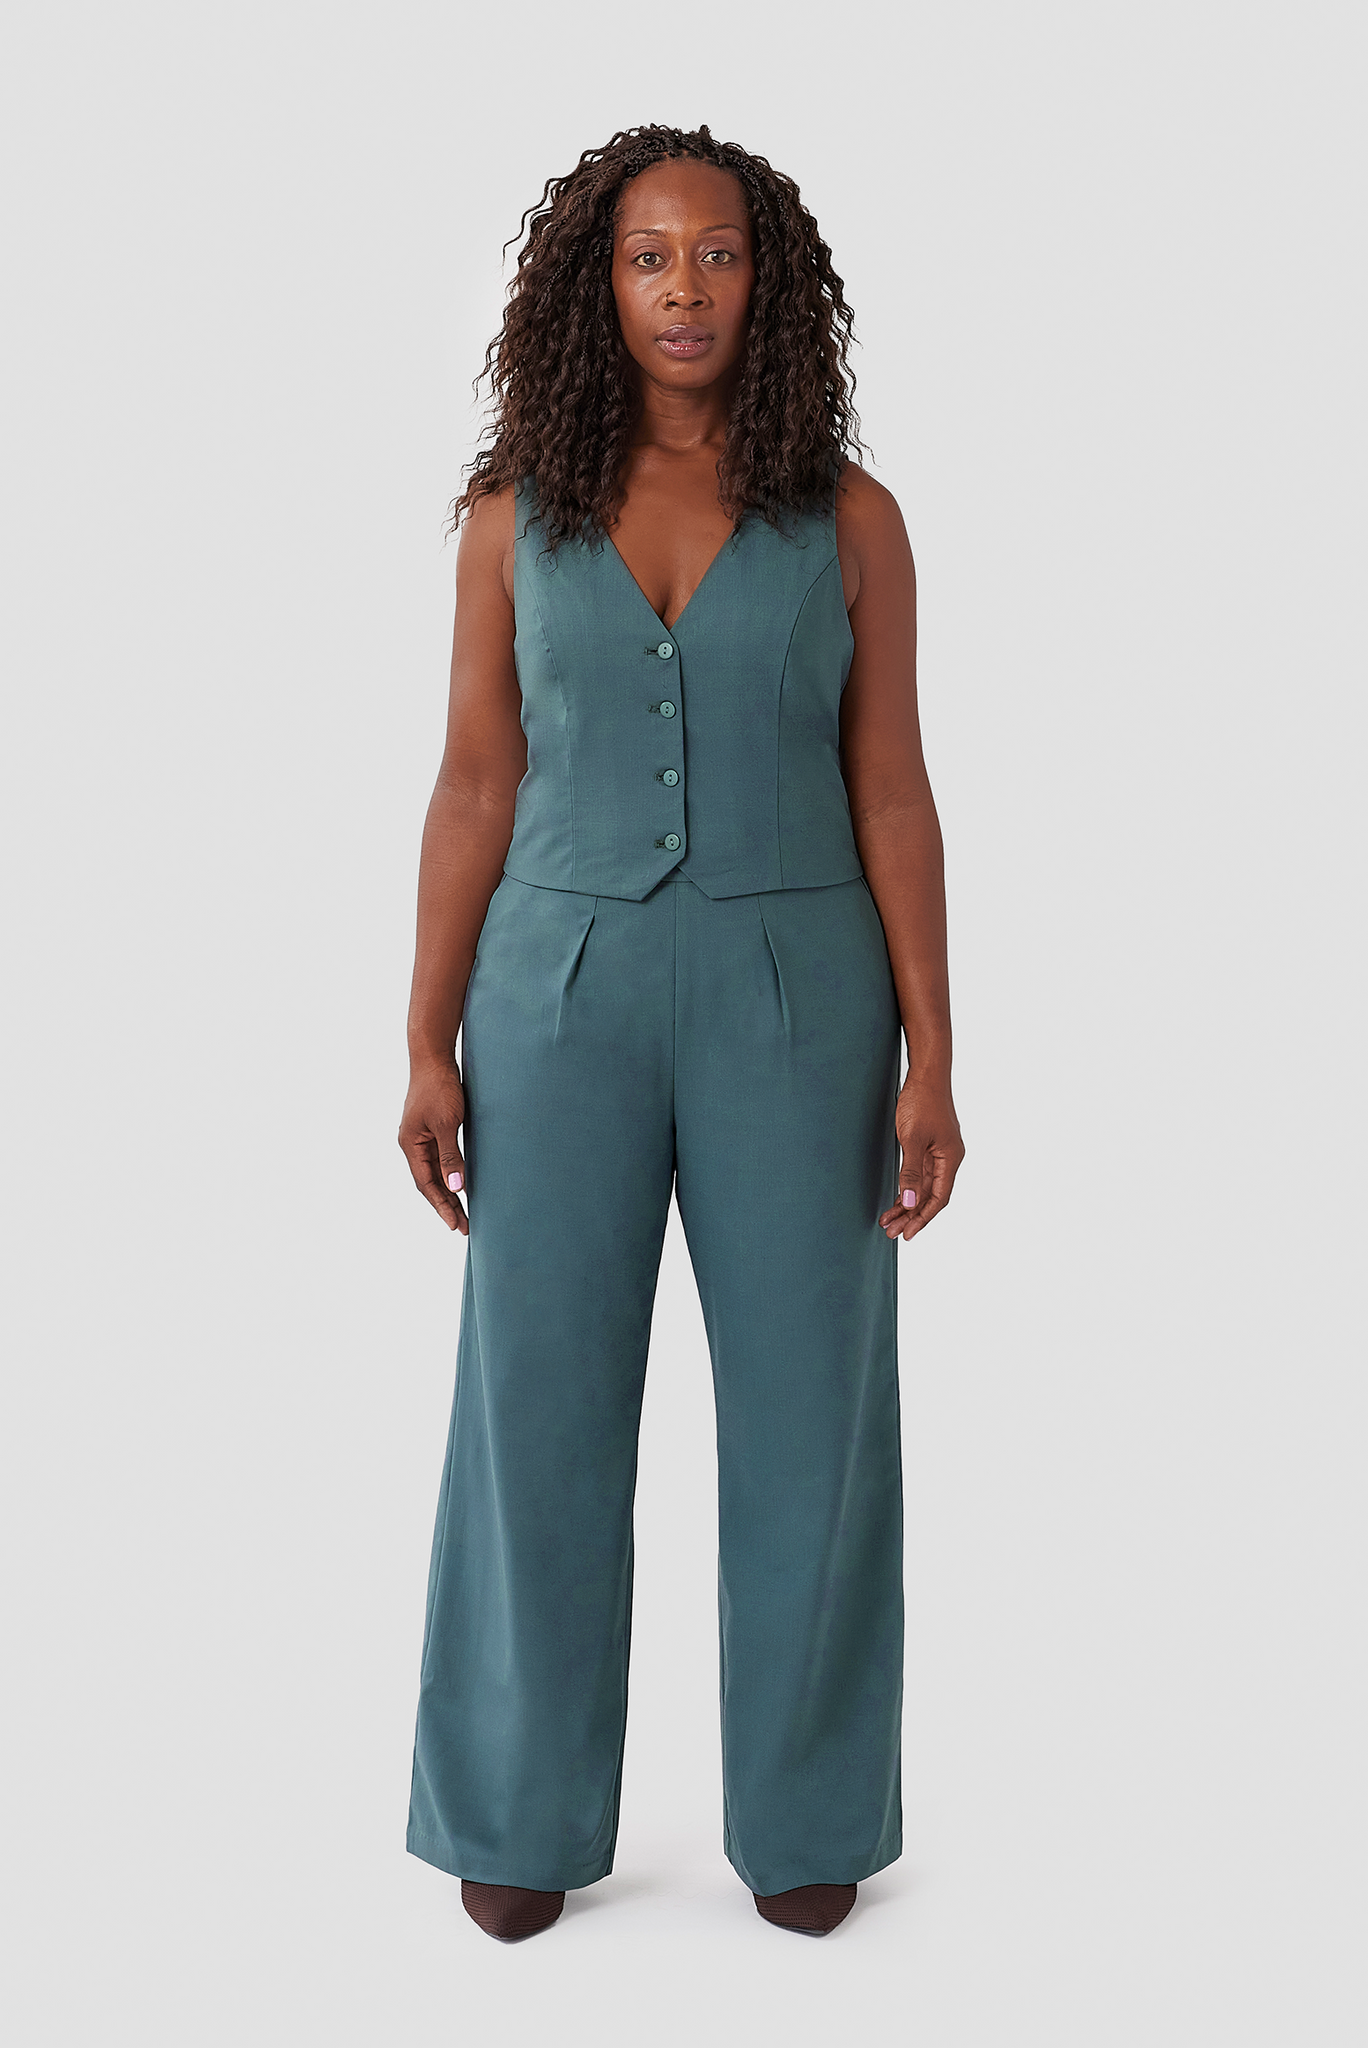 The Wool Vest is a beautiful, striking cropped vest made from a warm 96% wool and 4% stretch for comfort. It is fully lined with a smooth organic cotton lining, and pairs perfectly with the high waisted Wool Wide Leg Pant by Aam. Shown here is the gorgeous teal grey color.